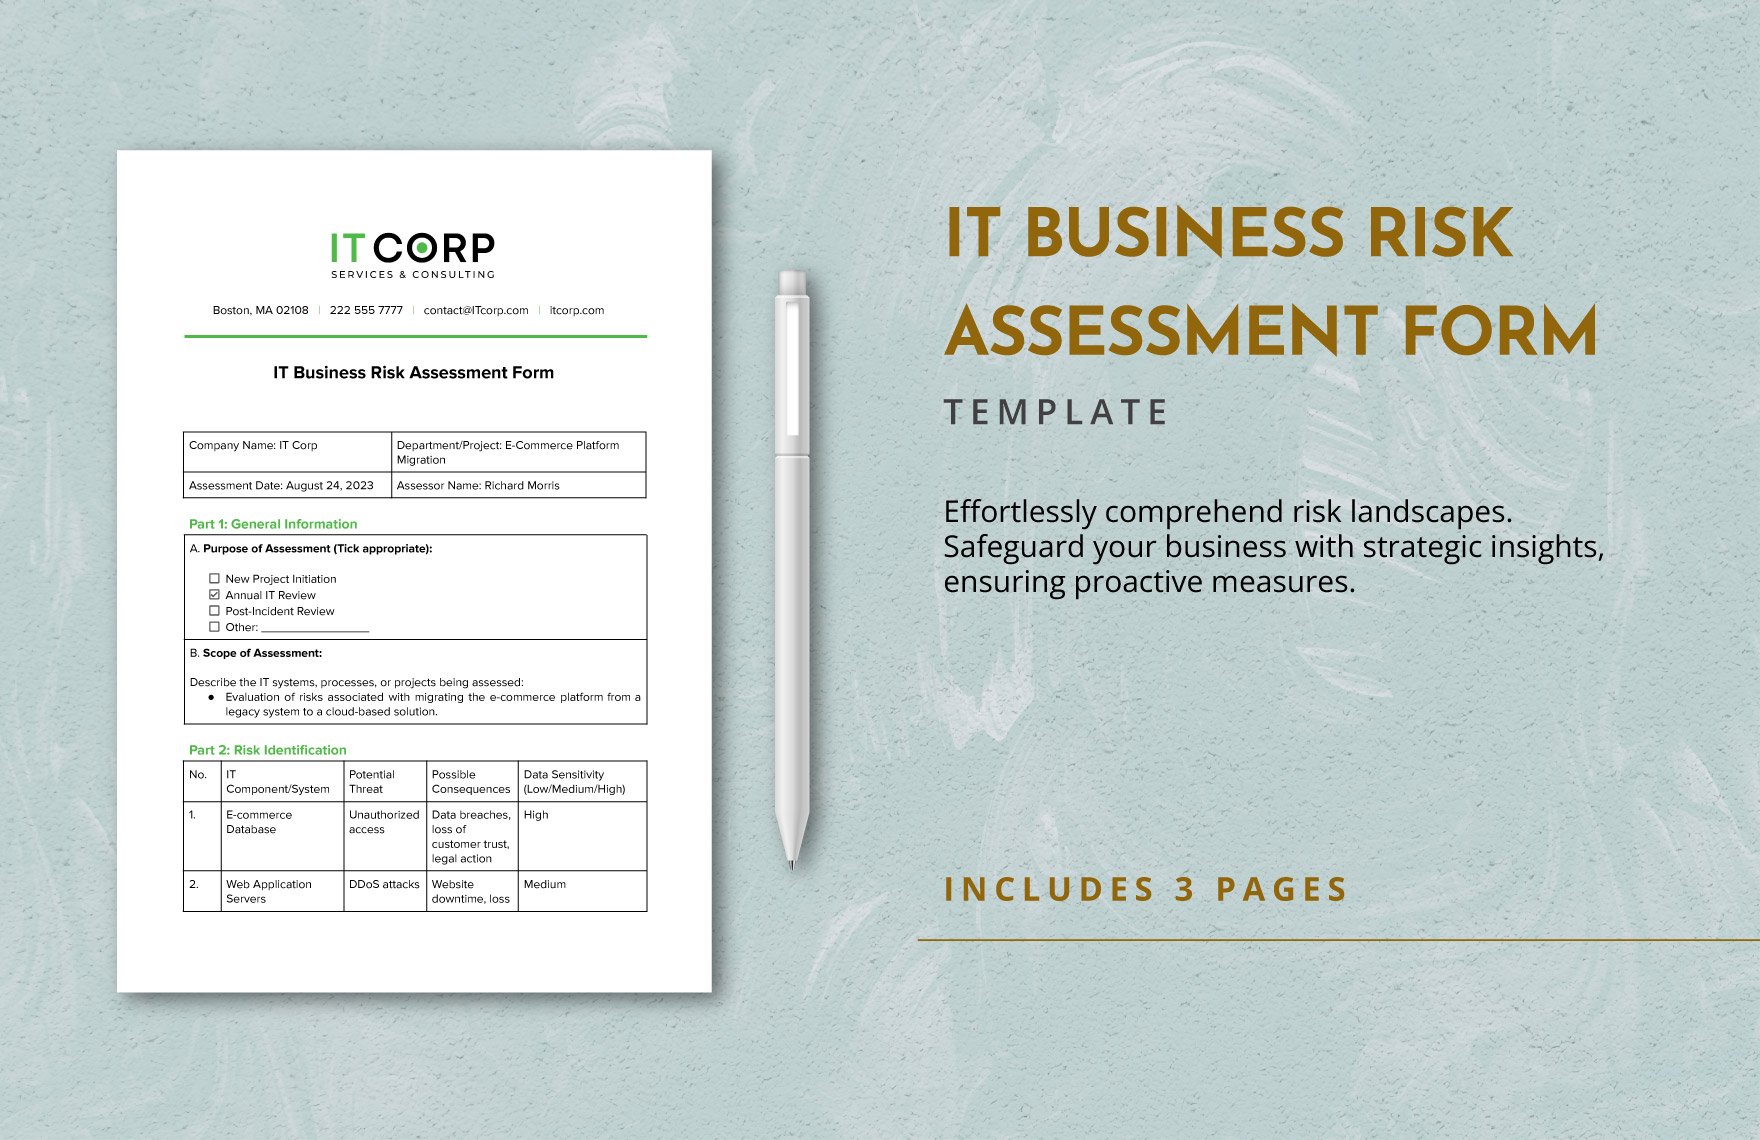 IT Business Risk Assessment Form Template in Word, Google Docs, PDF